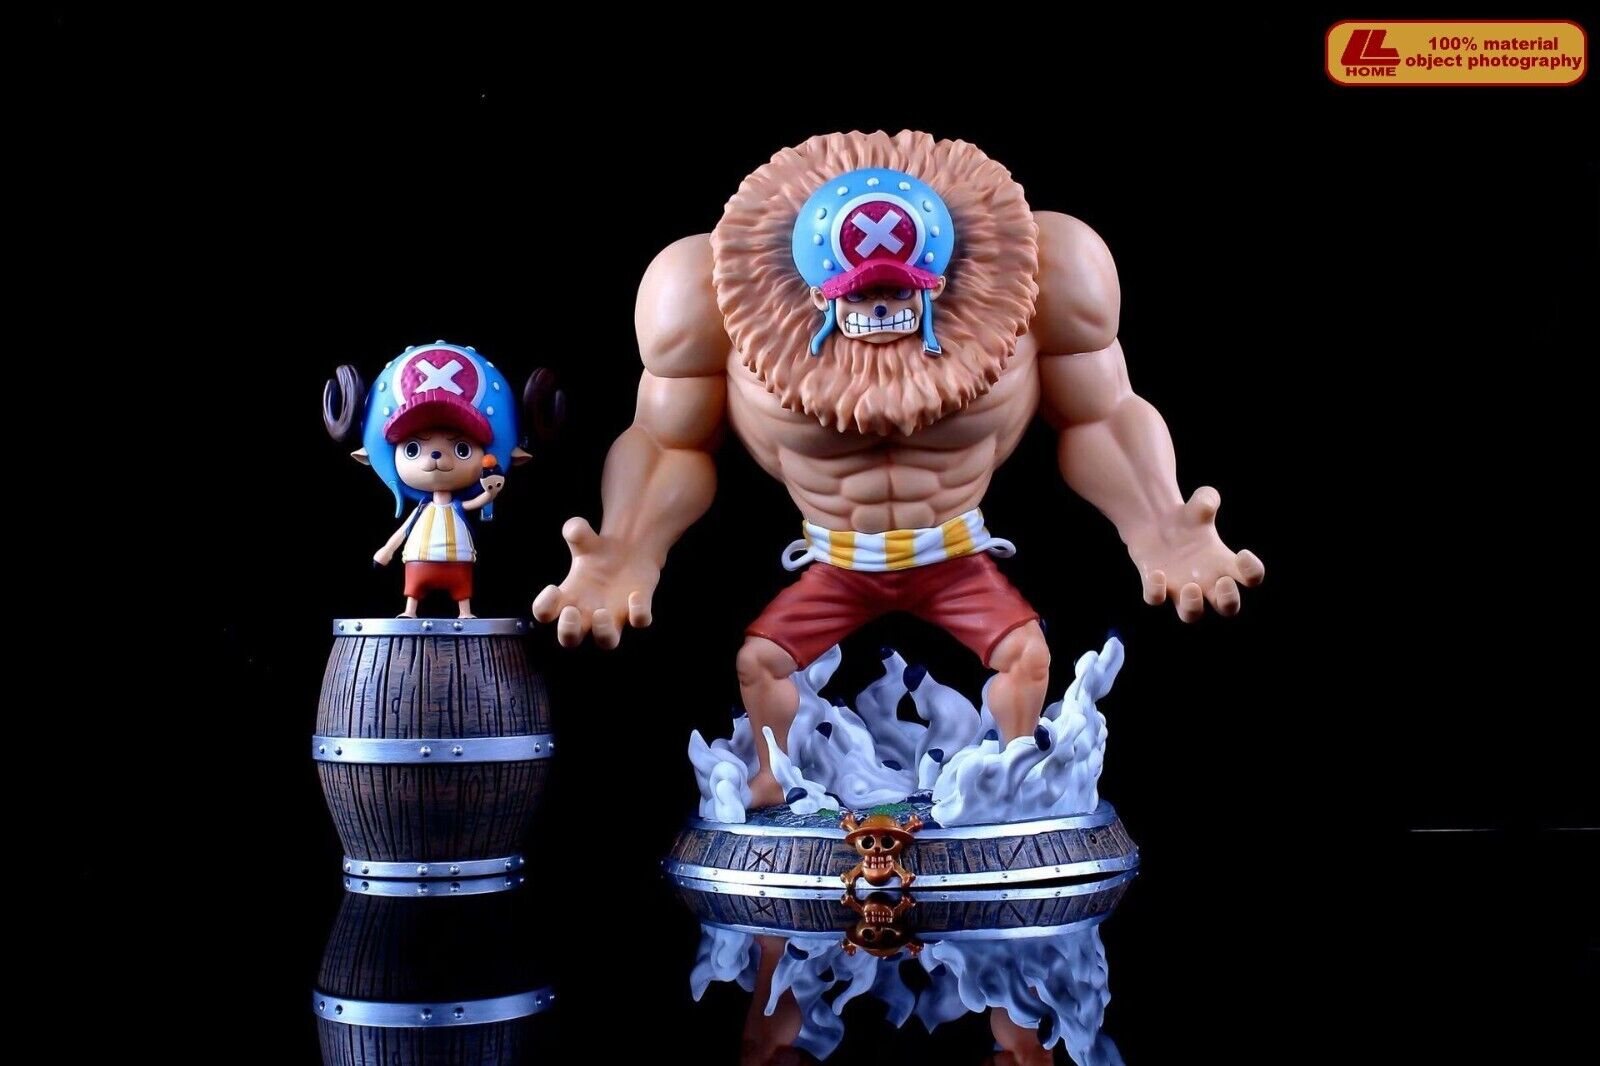 Anime One Piece TonyTony Chopper Dream Human Cute Muscle Figure Statue Toy Gift